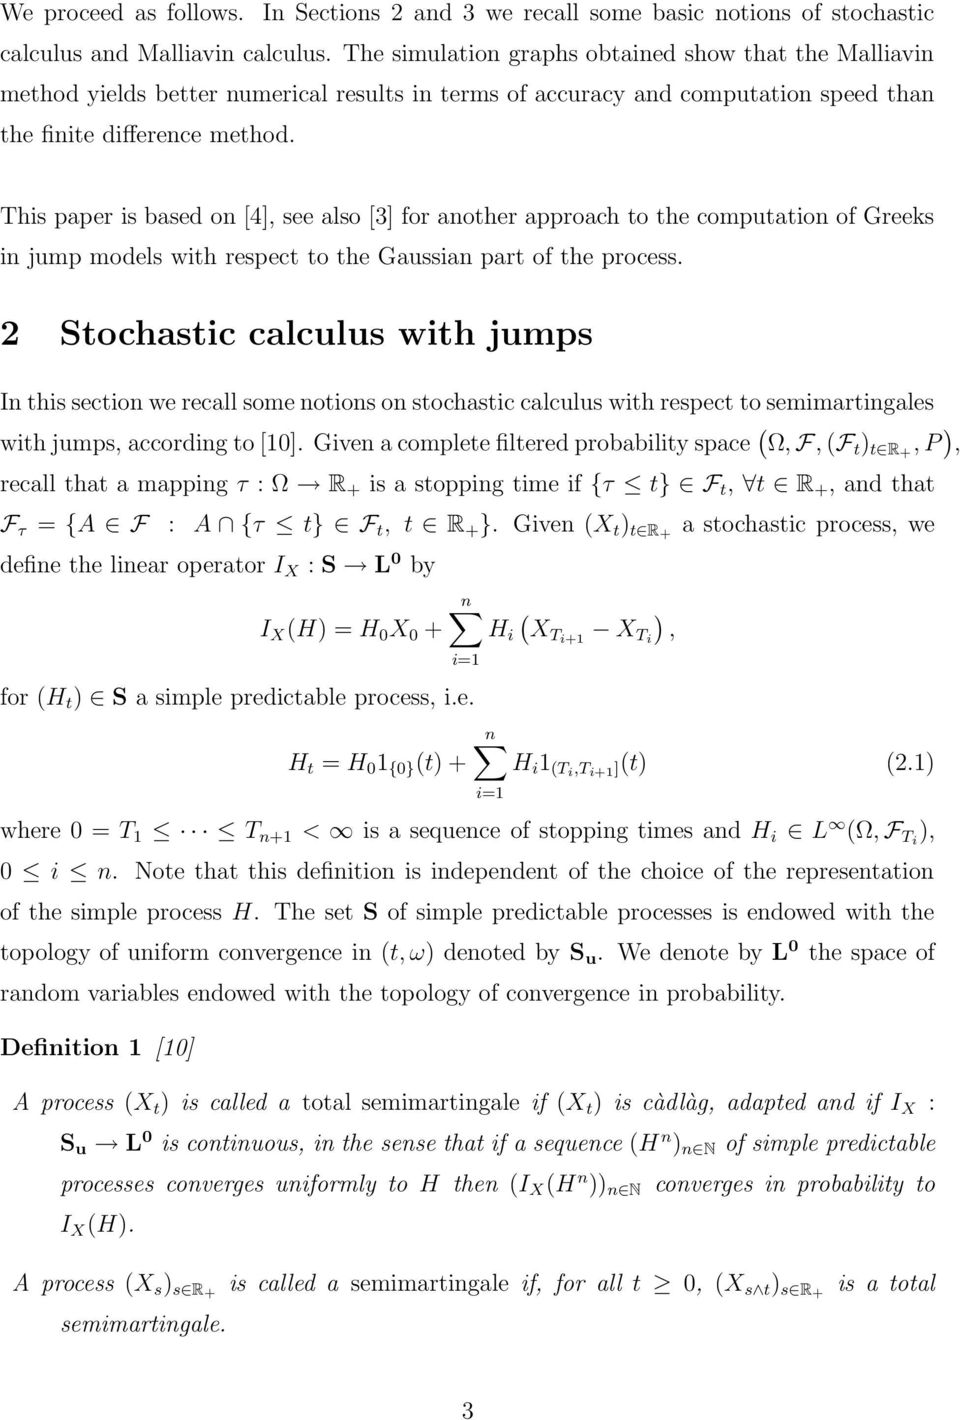 This paper is based on [4], see also [3] for another approach to the computation of Greeks in jump models with respect to the Gaussian part of the process.